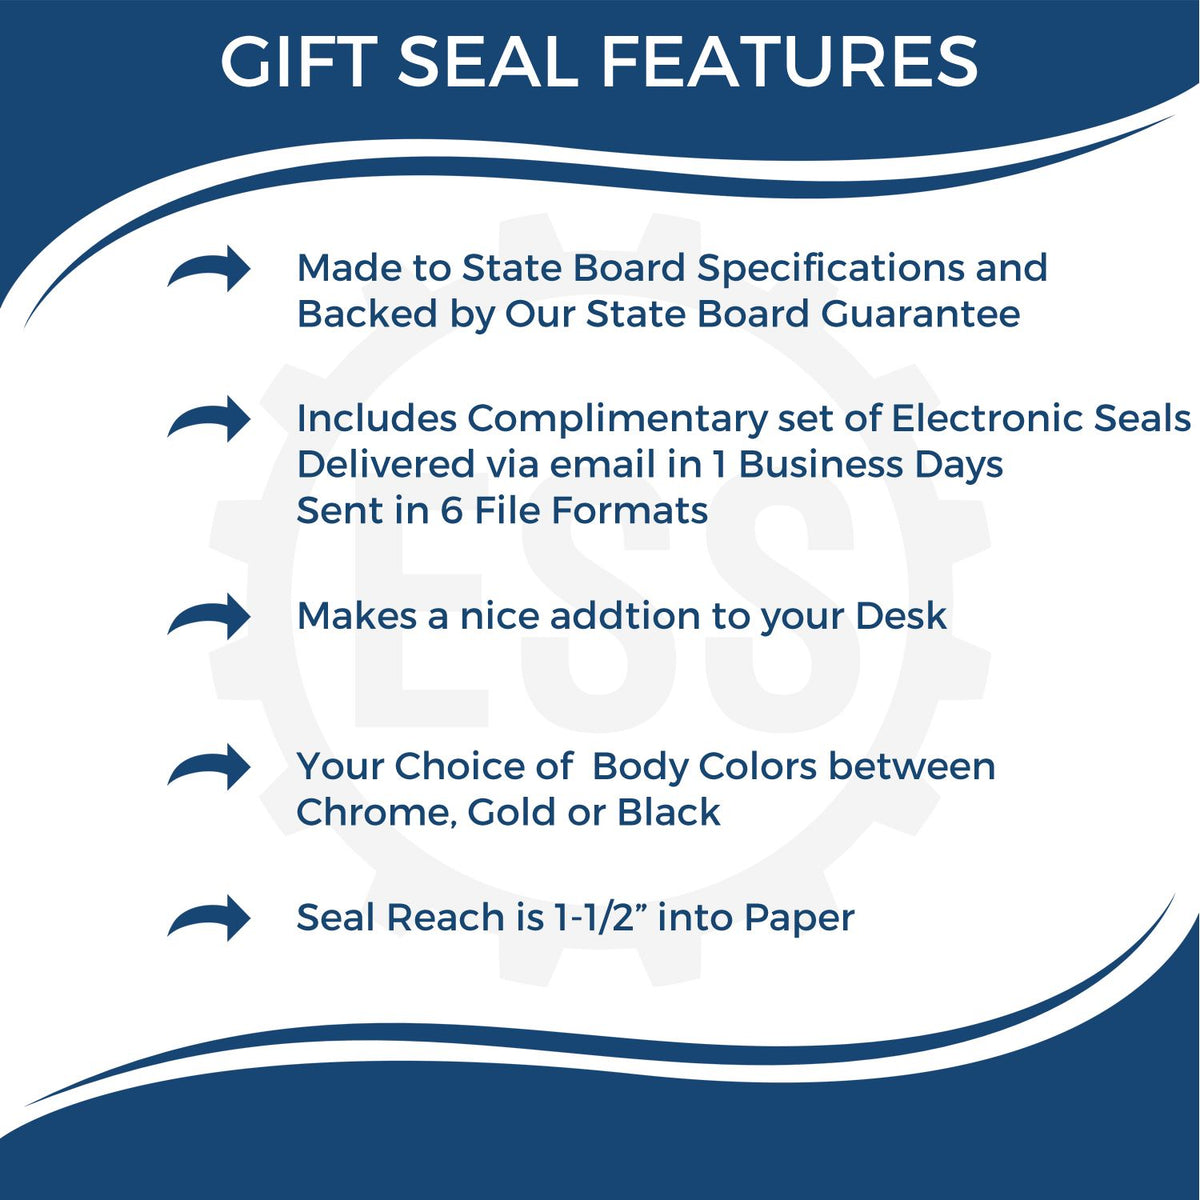 A picture of an infographic highlighting the selling points for the Gift Indiana Engineer Seal